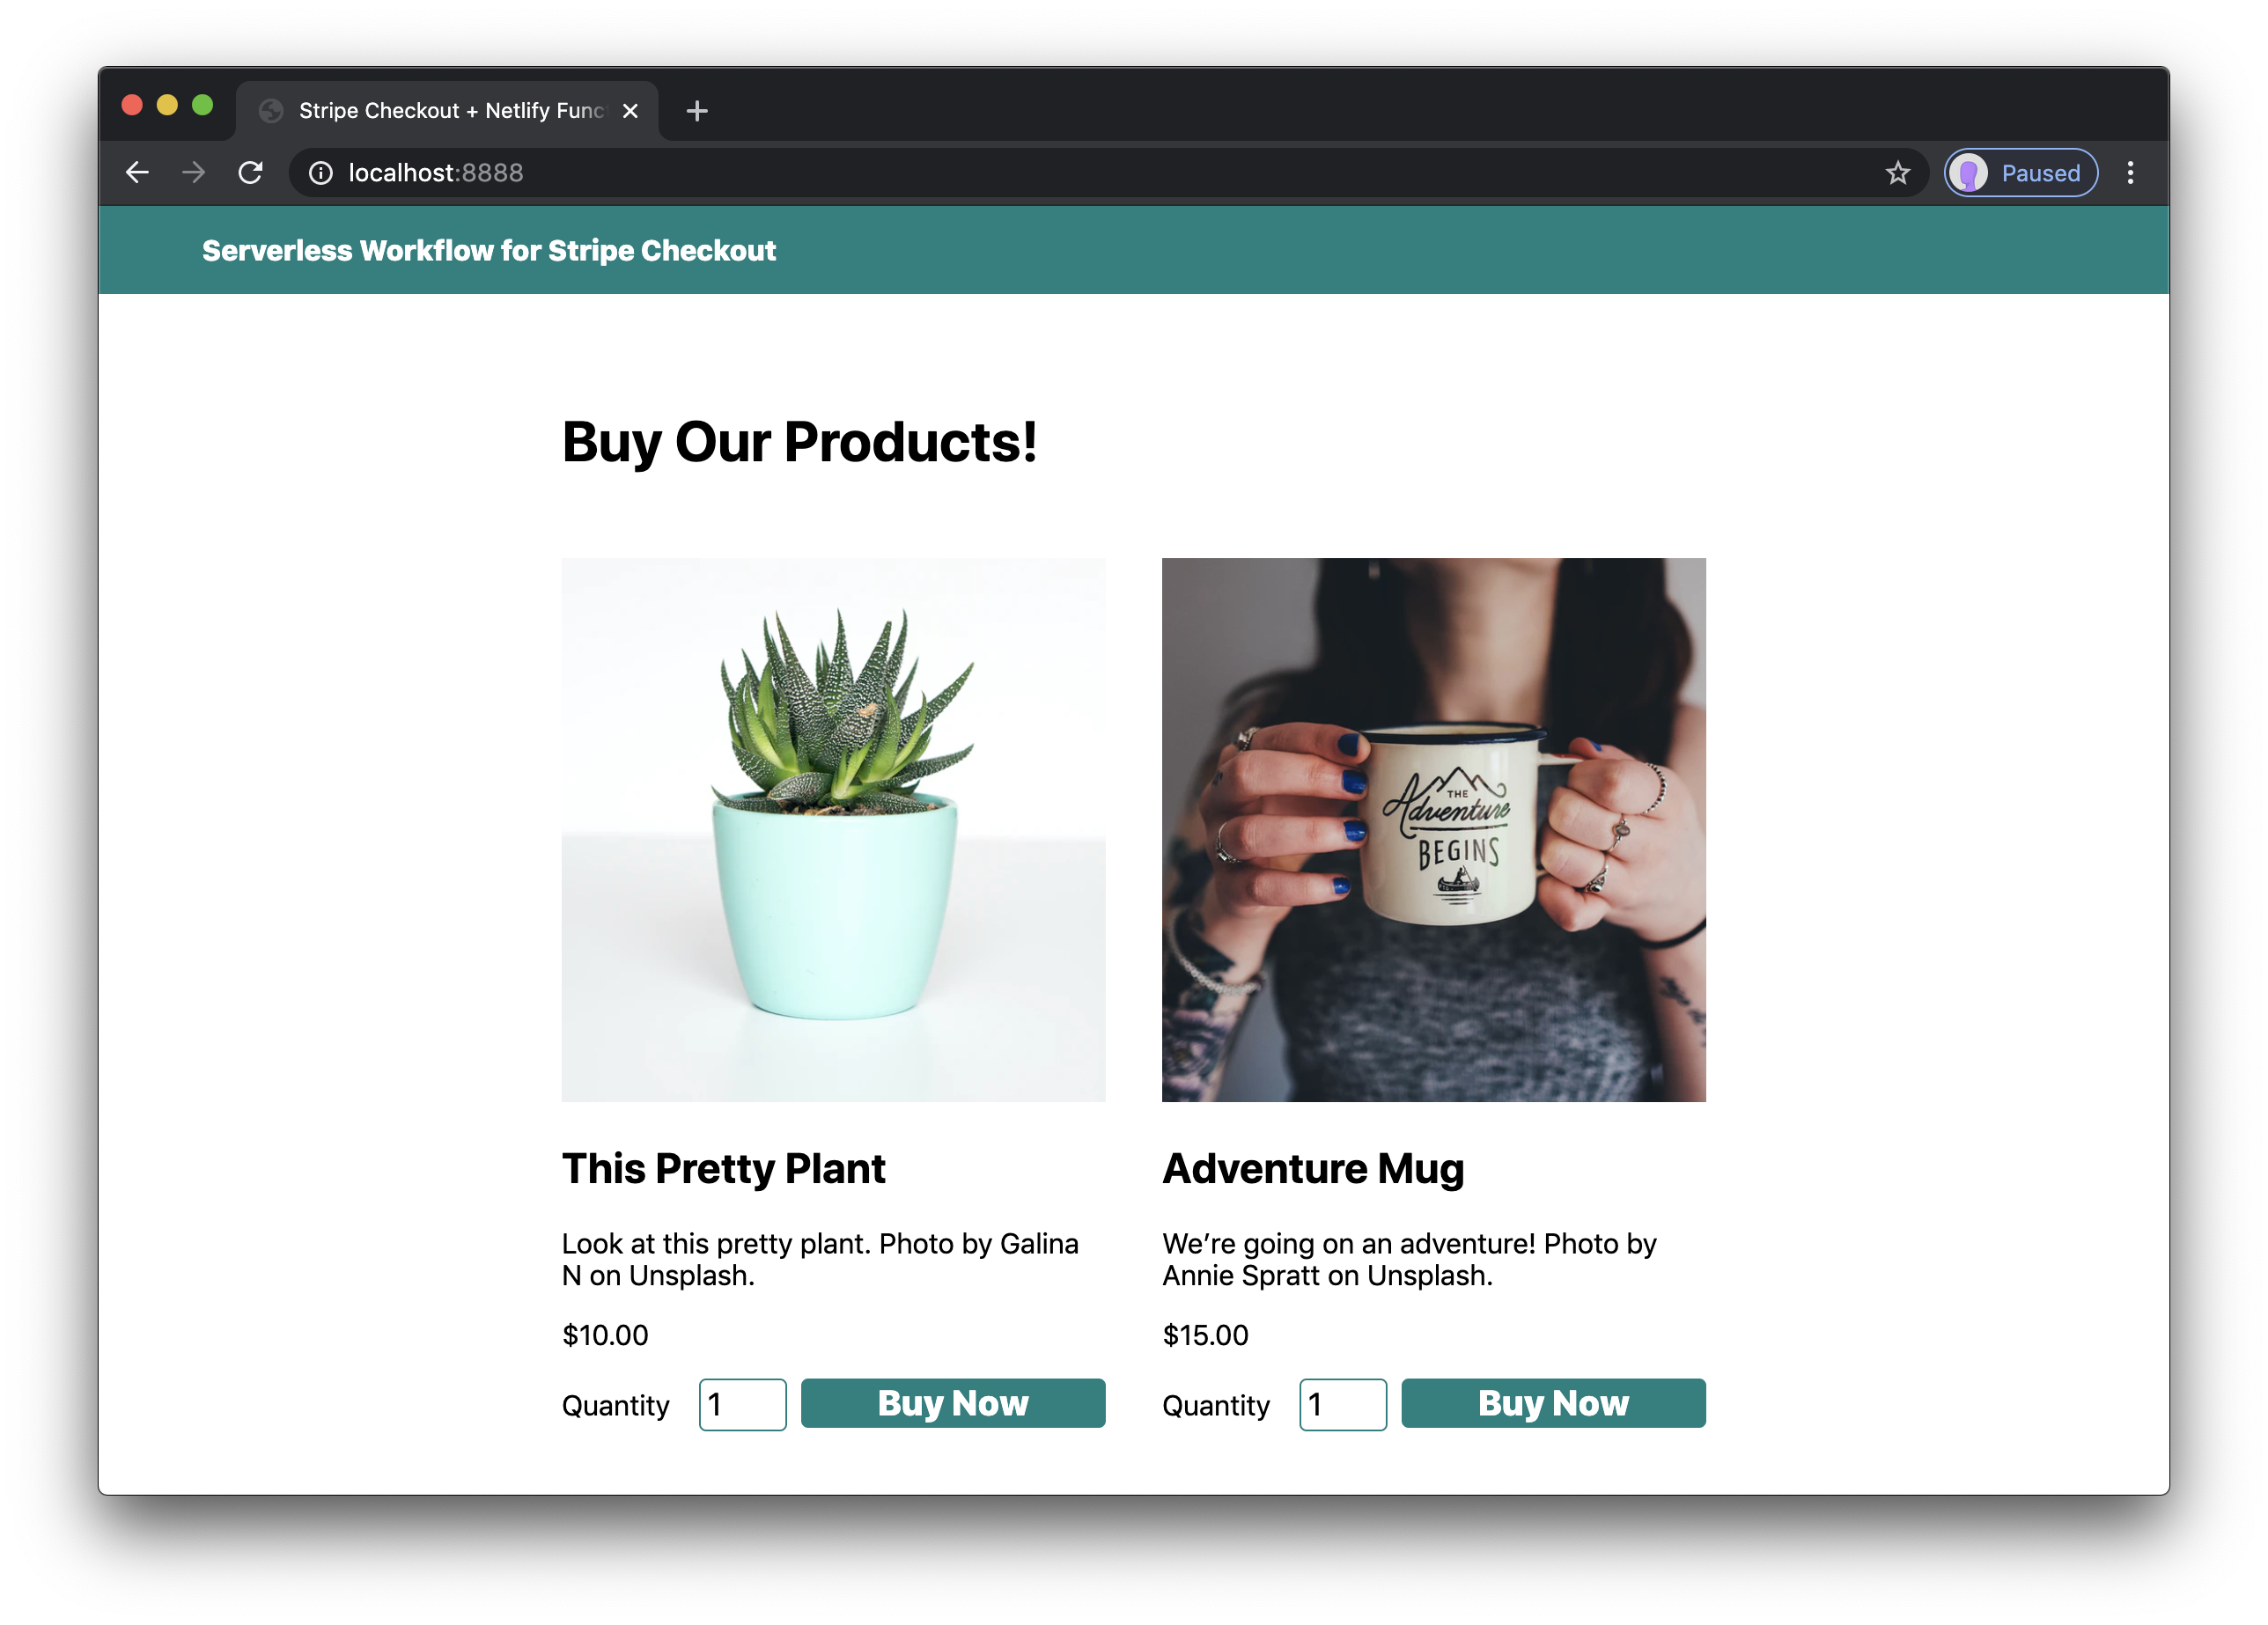 styled products in the browser